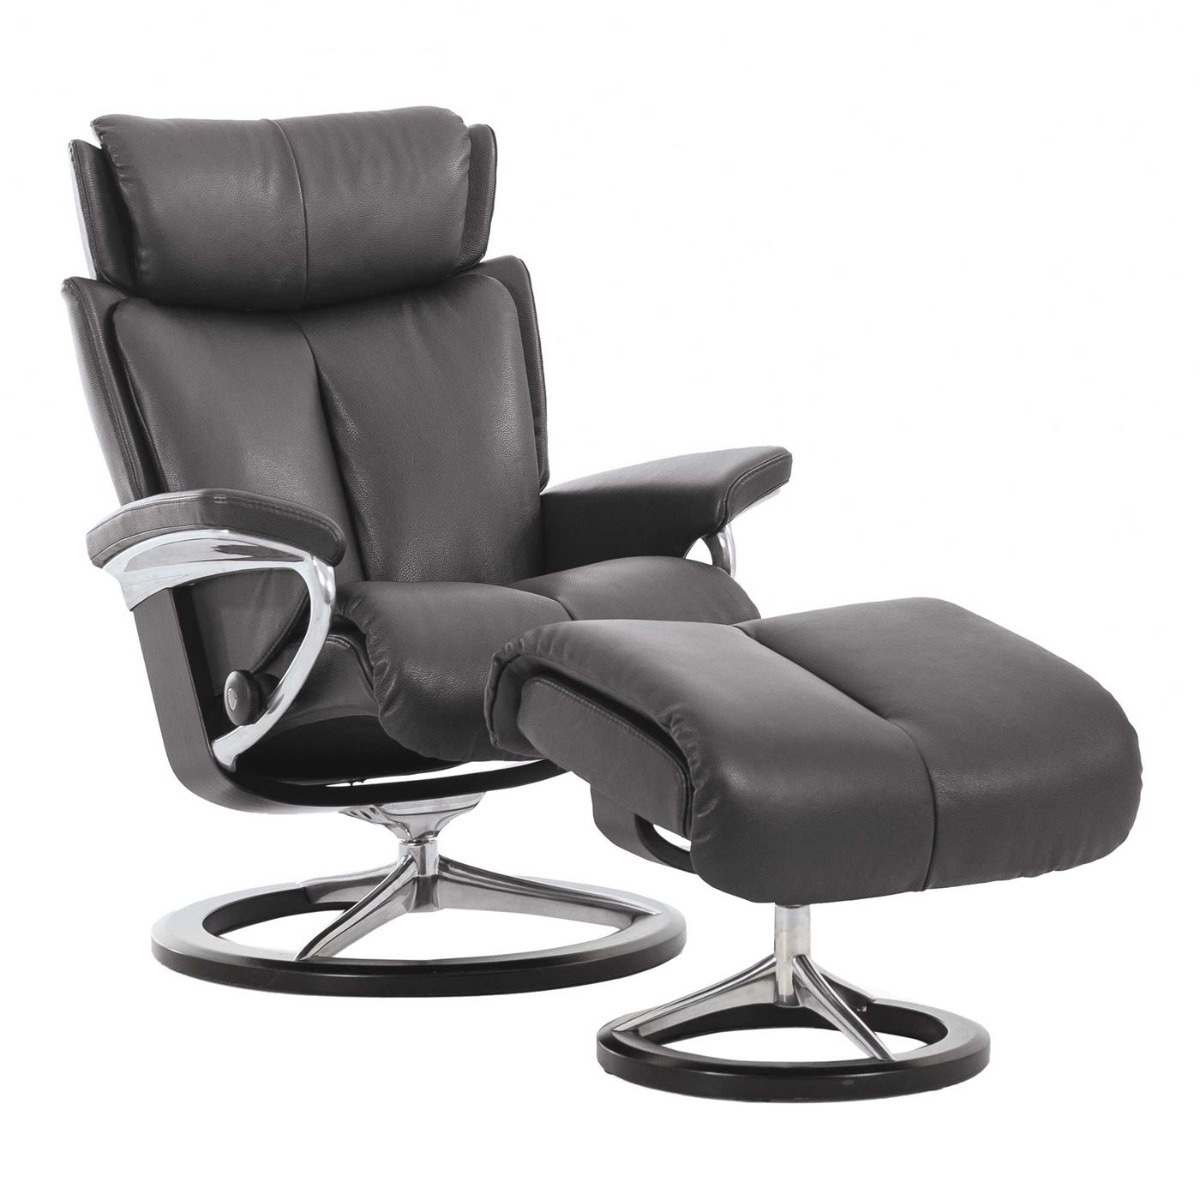 Stressless Magic Medium Recliner Chair & Stool With Signature Base, Black Leather - Barker & Stonehouse - image 1